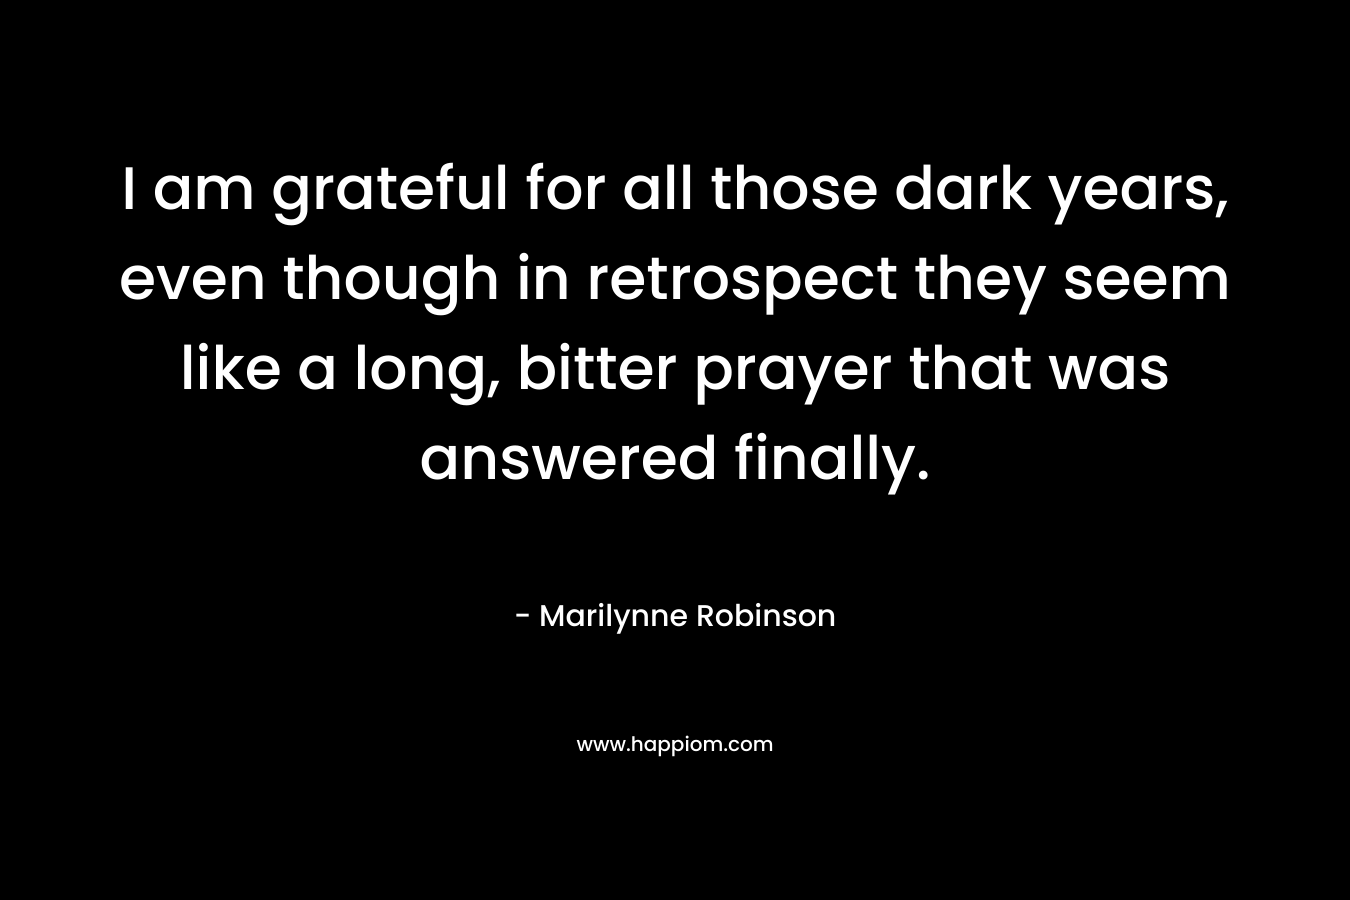 I am grateful for all those dark years, even though in retrospect they seem like a long, bitter prayer that was answered finally.